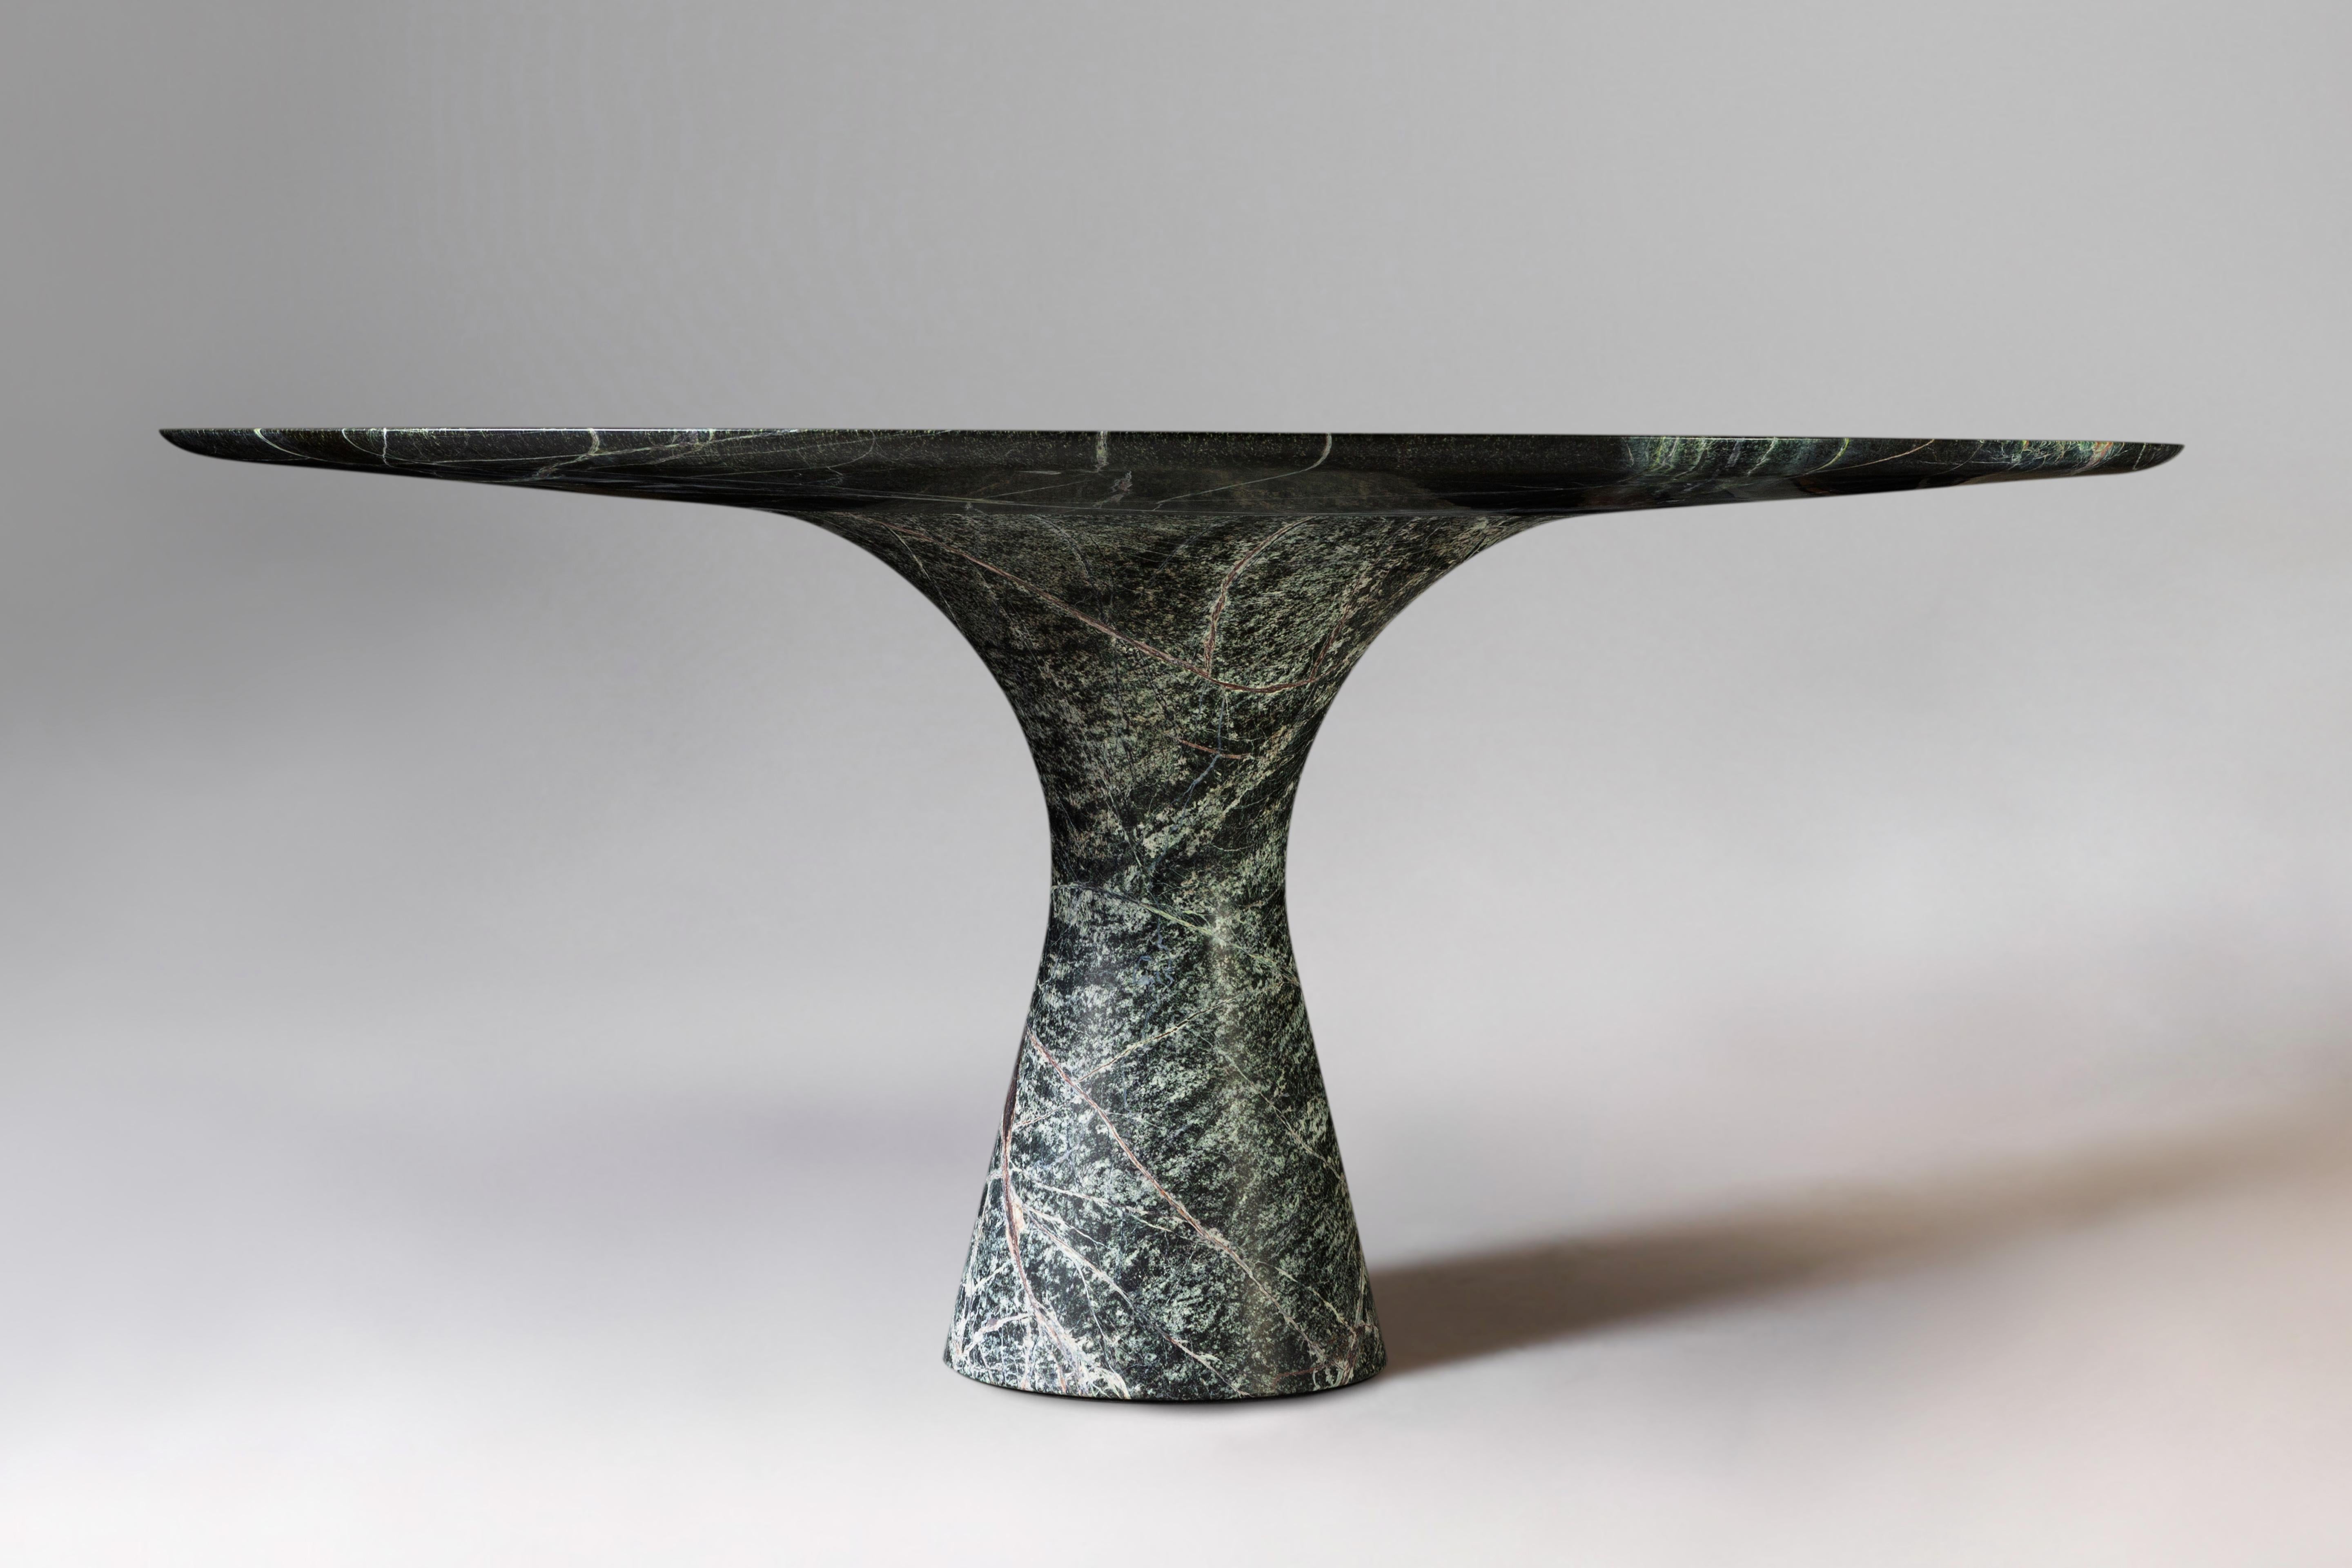 Picasso Green Refined Contemporary Marble Oval Table 210/75
Dimensions: 210 x 135 x 75 cm
Materials: Picasso Green marble.

Angelo is the essence of a round table in natural stone, a sculptural shape in robust material with elegant lines and refined